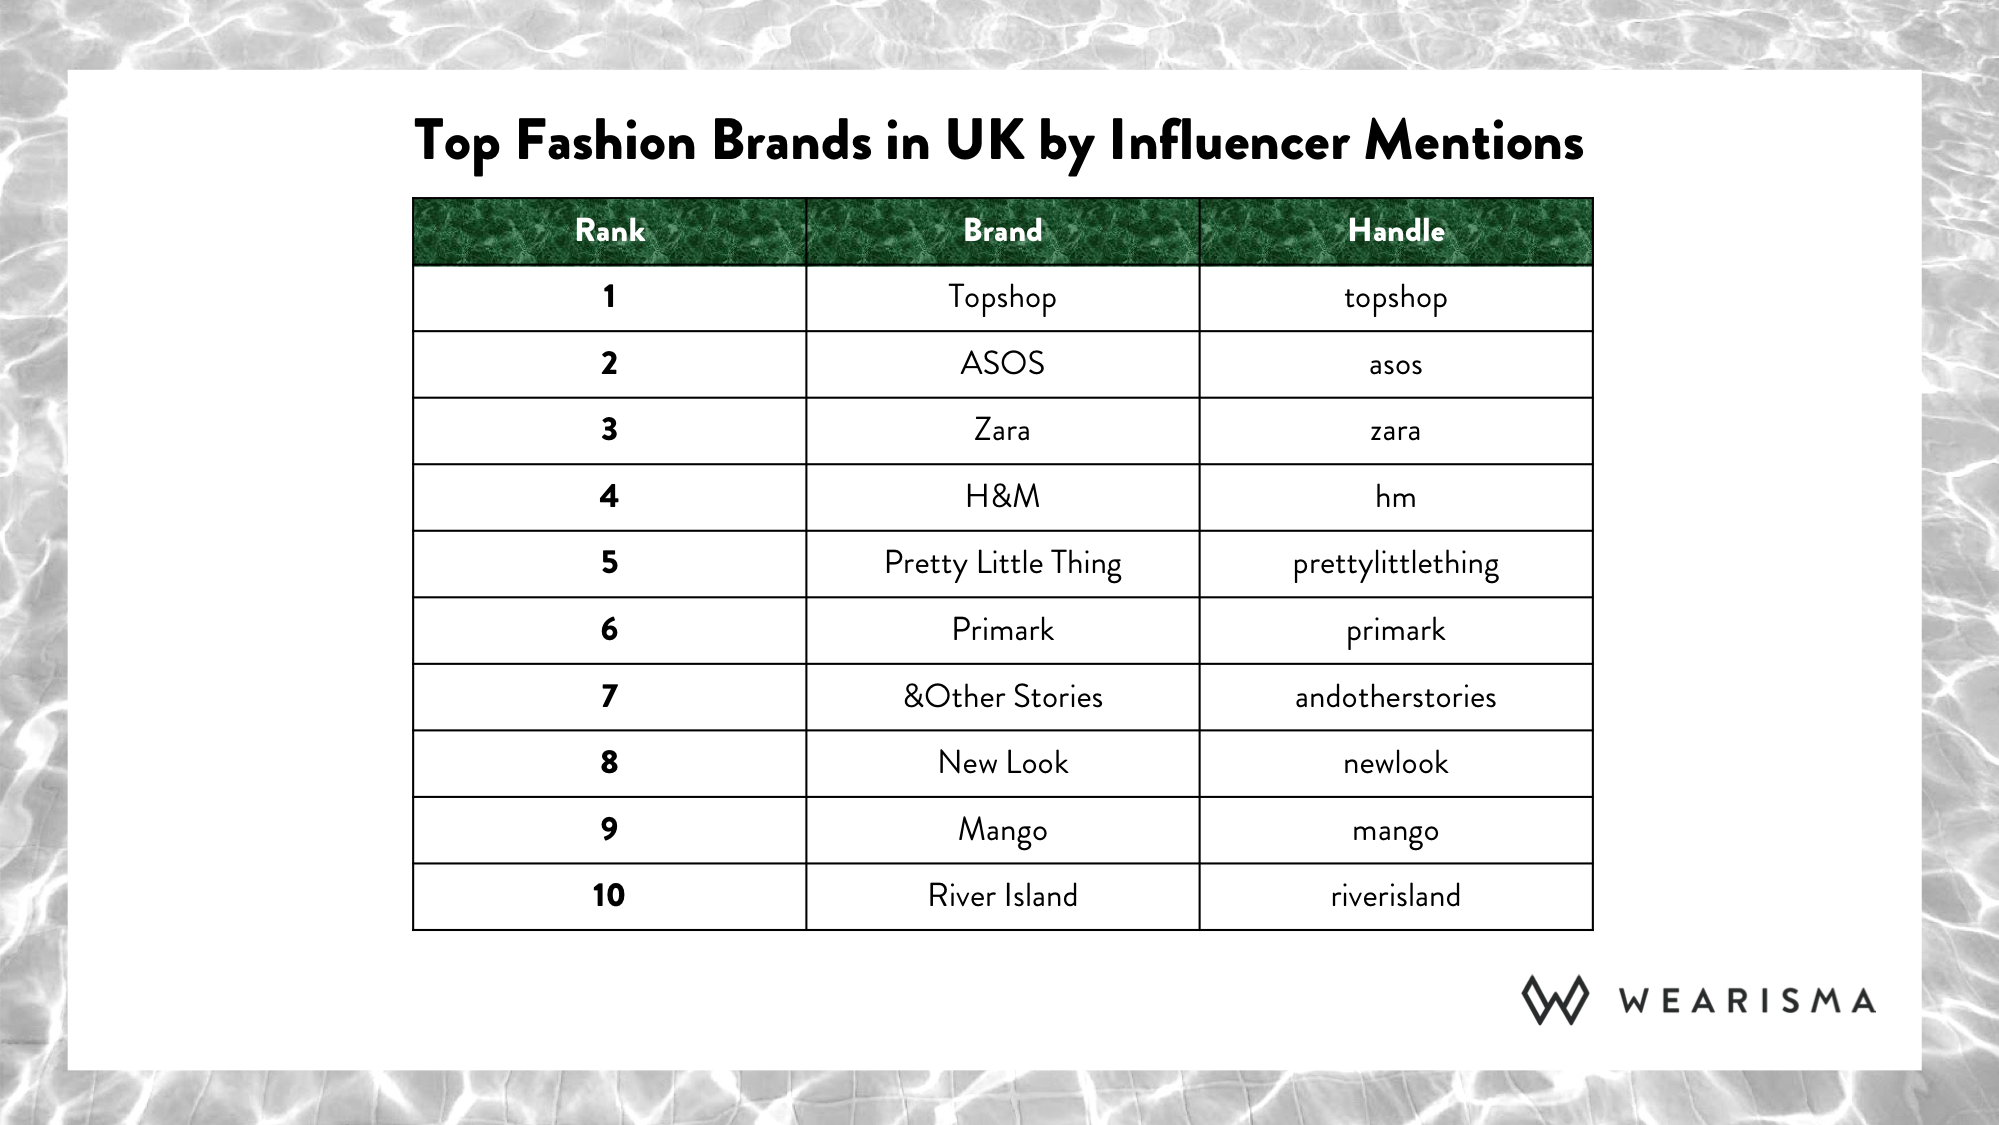 Who Are The 3 Most Mentioned Fashion Brands In The Uk